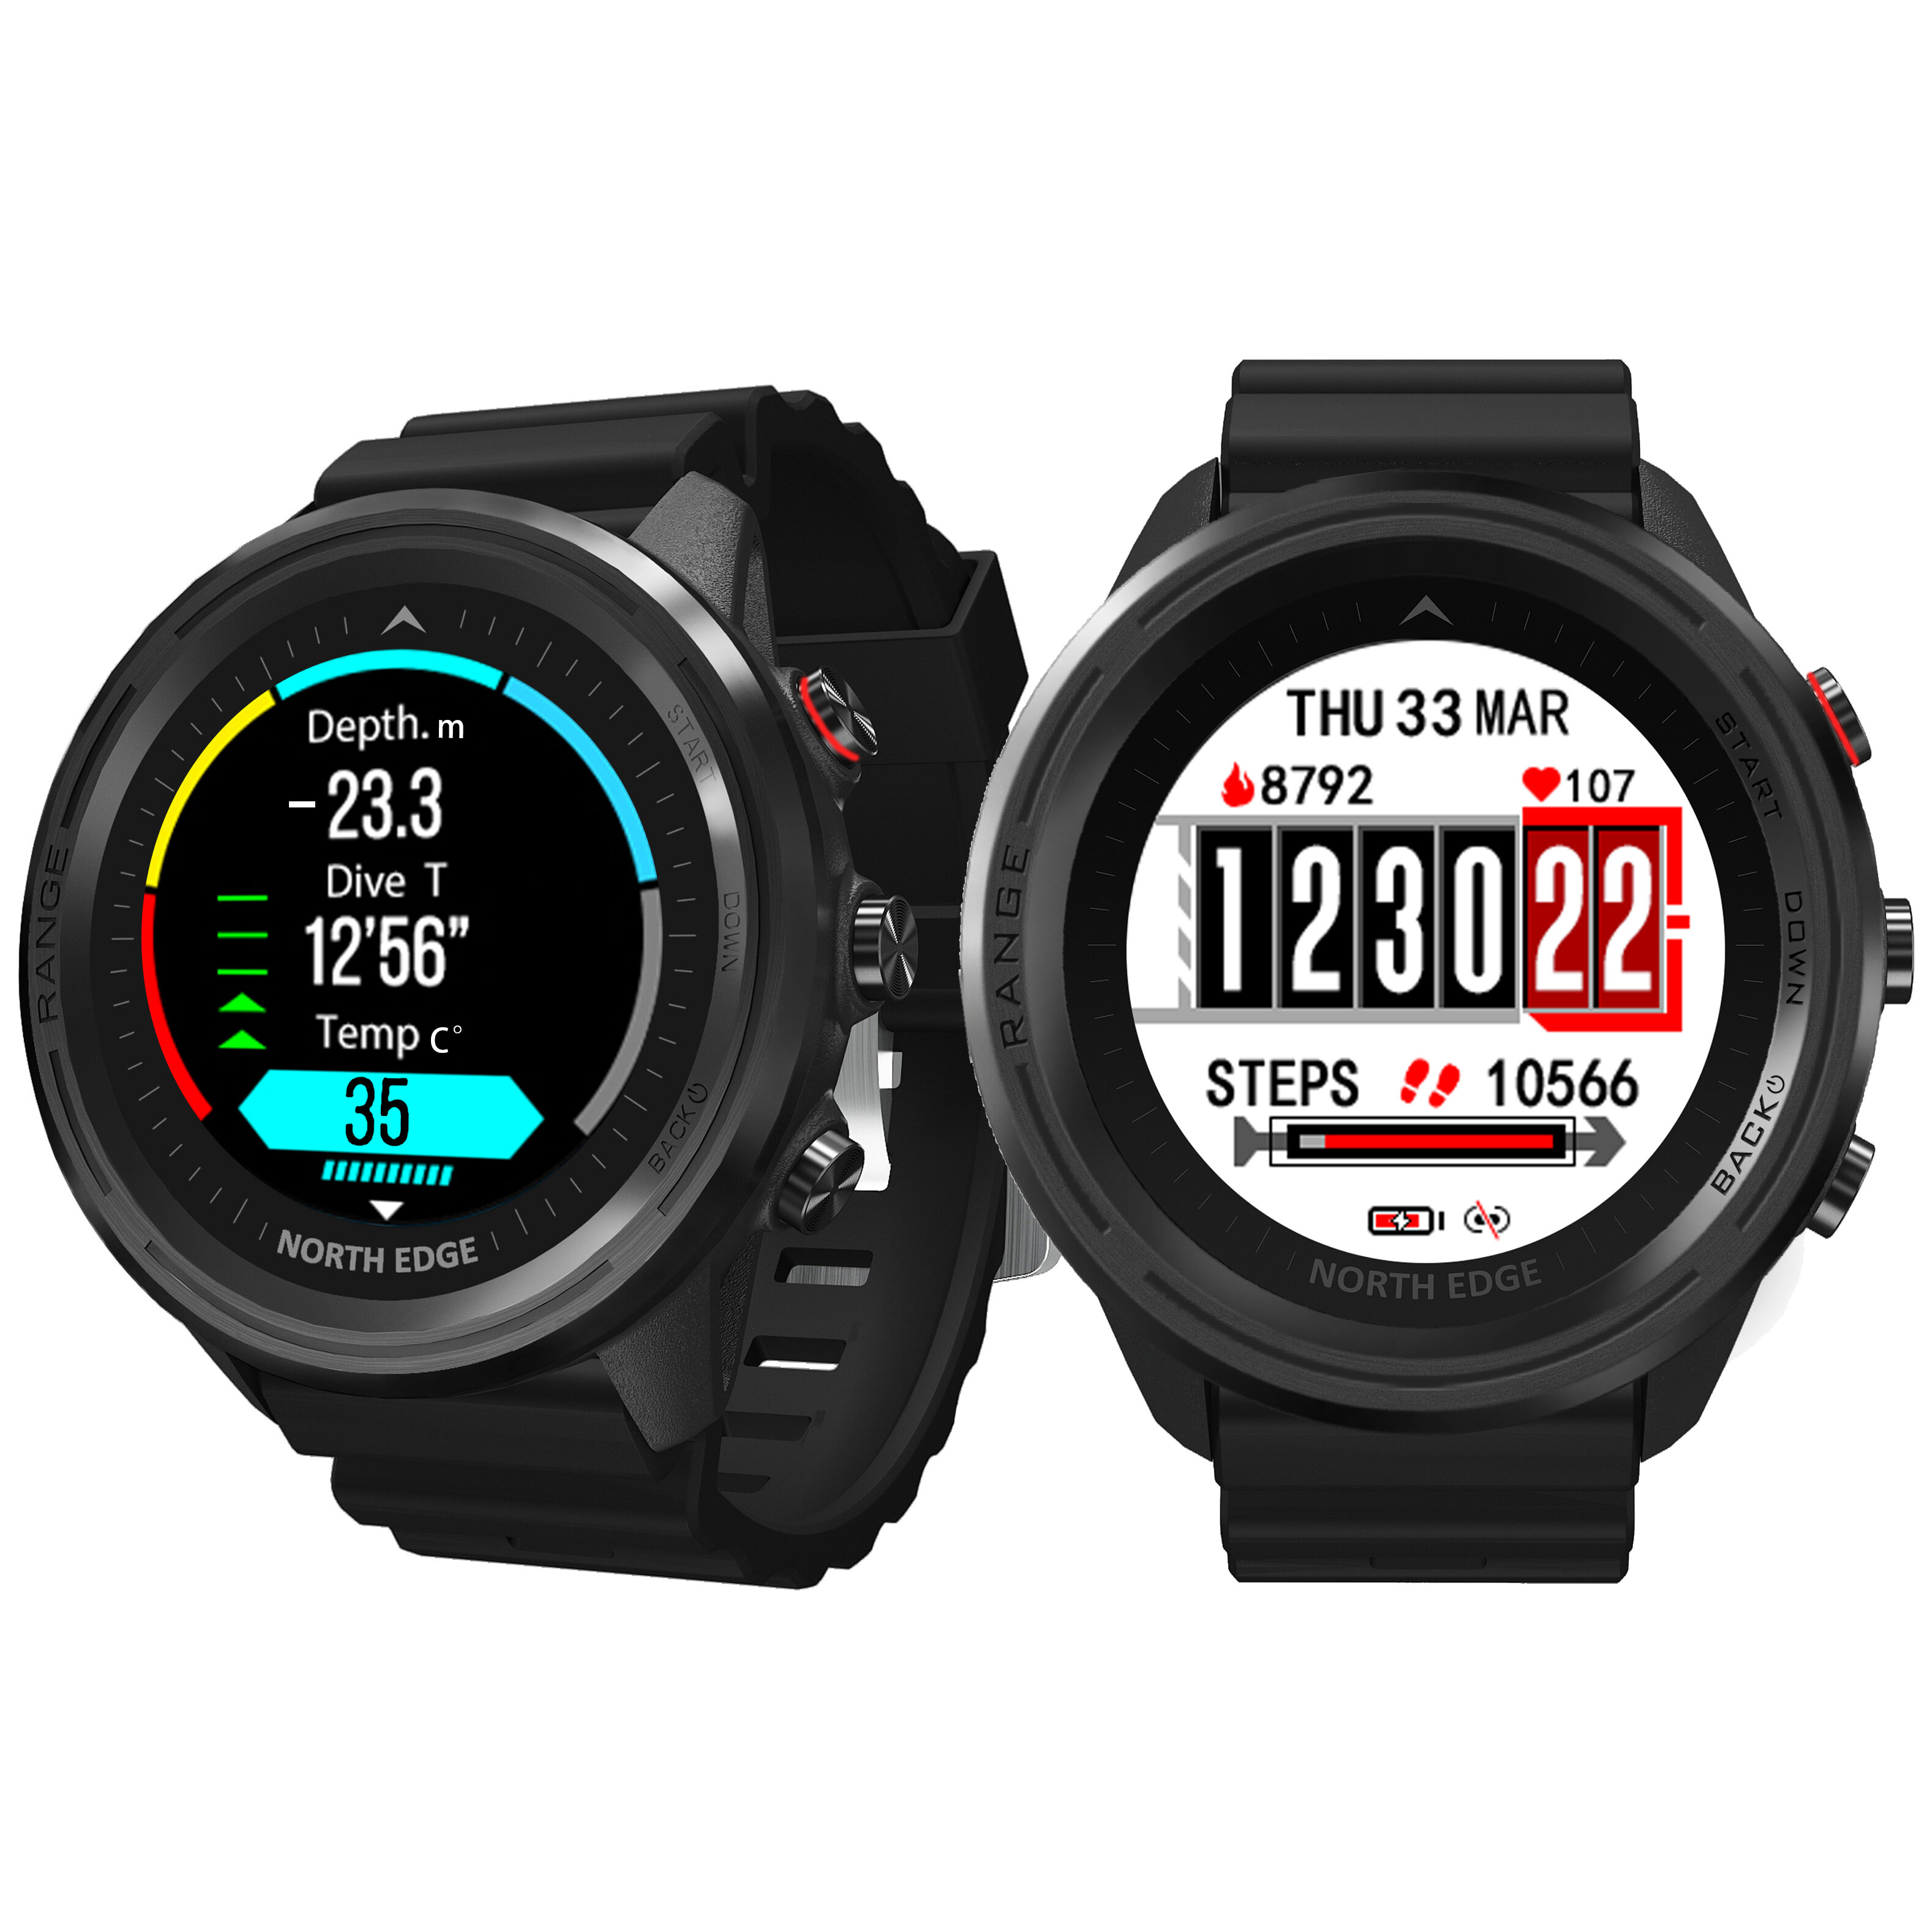 North Edge Range5 1.2 inch AMOLED Transflective Refilective Screen Heart Rate Monitor GPS Motion Track Altitude Compass